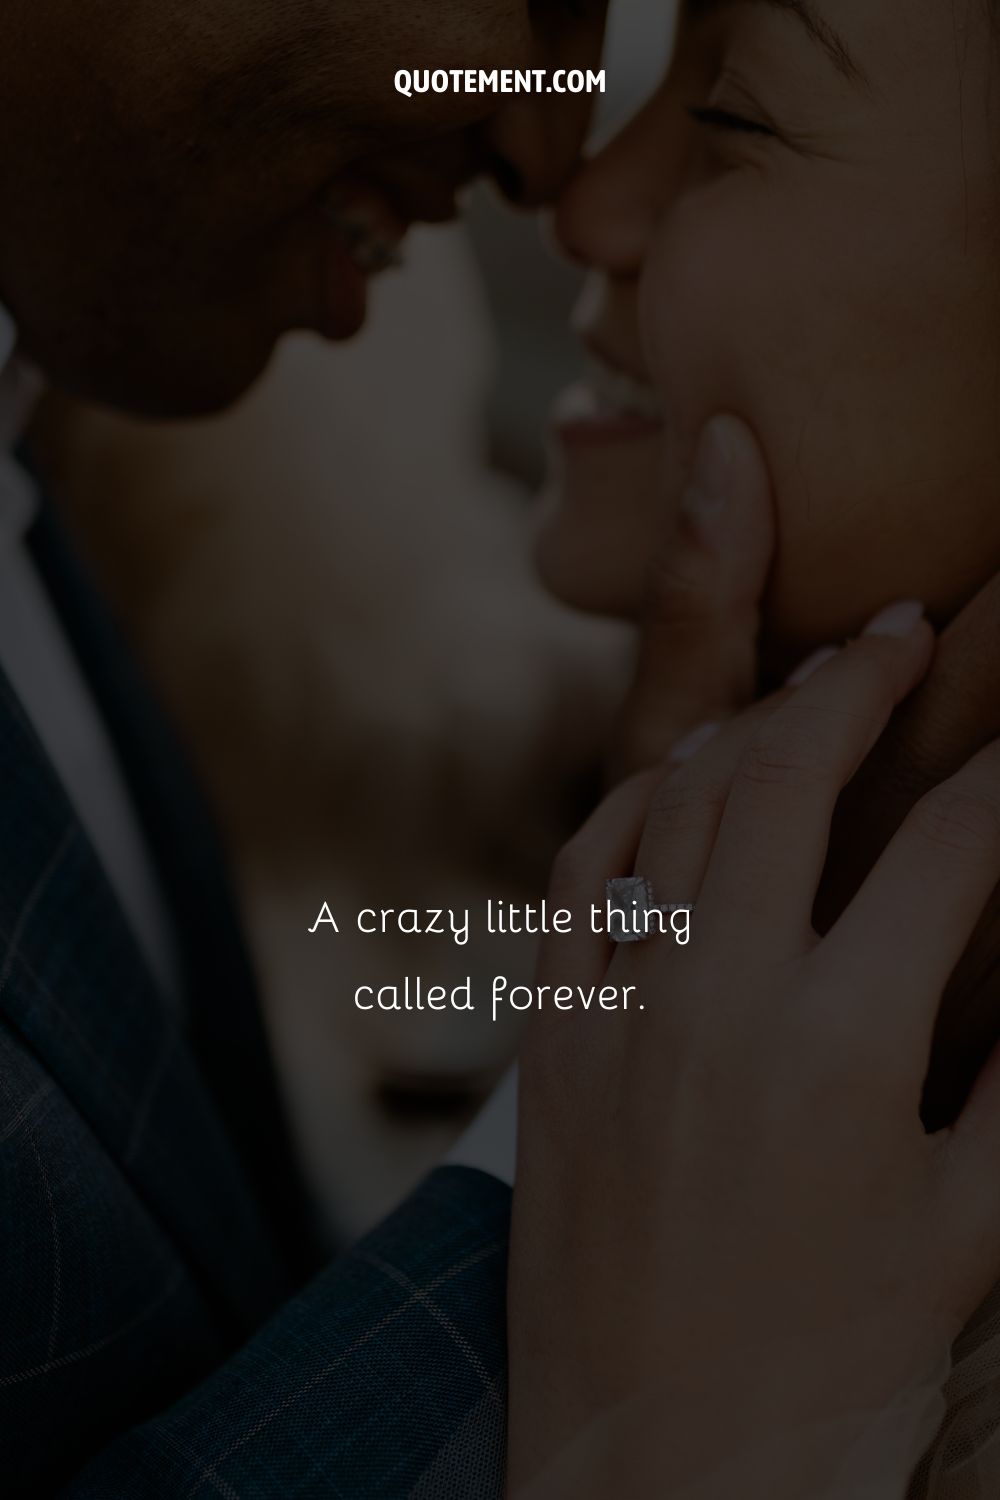 A crazy little thing called forever.